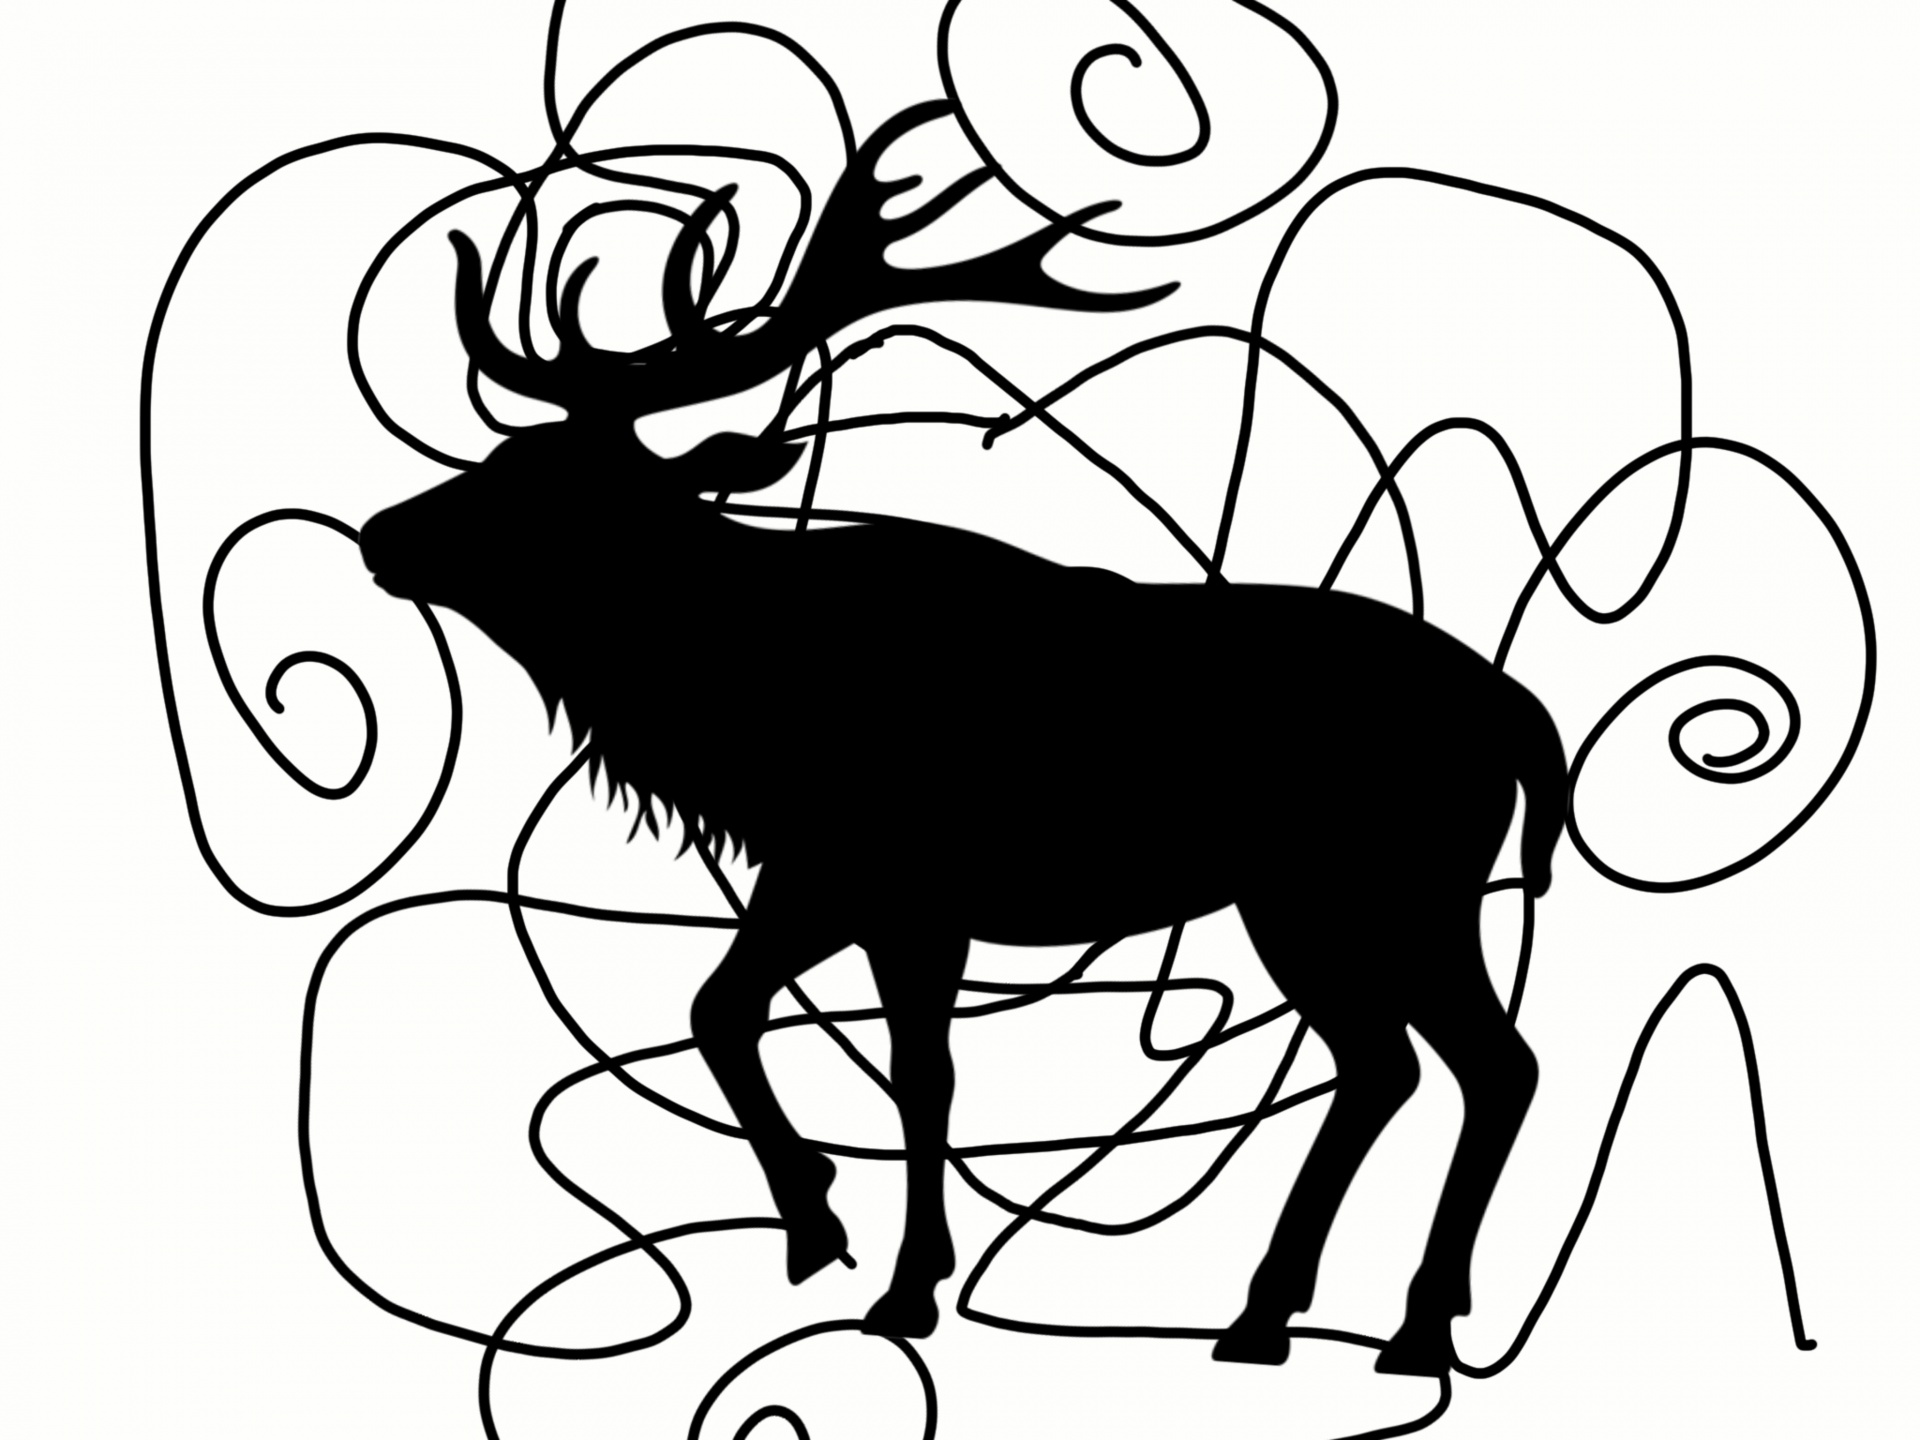 Deer Outline Drawing | Free download on ClipArtMag